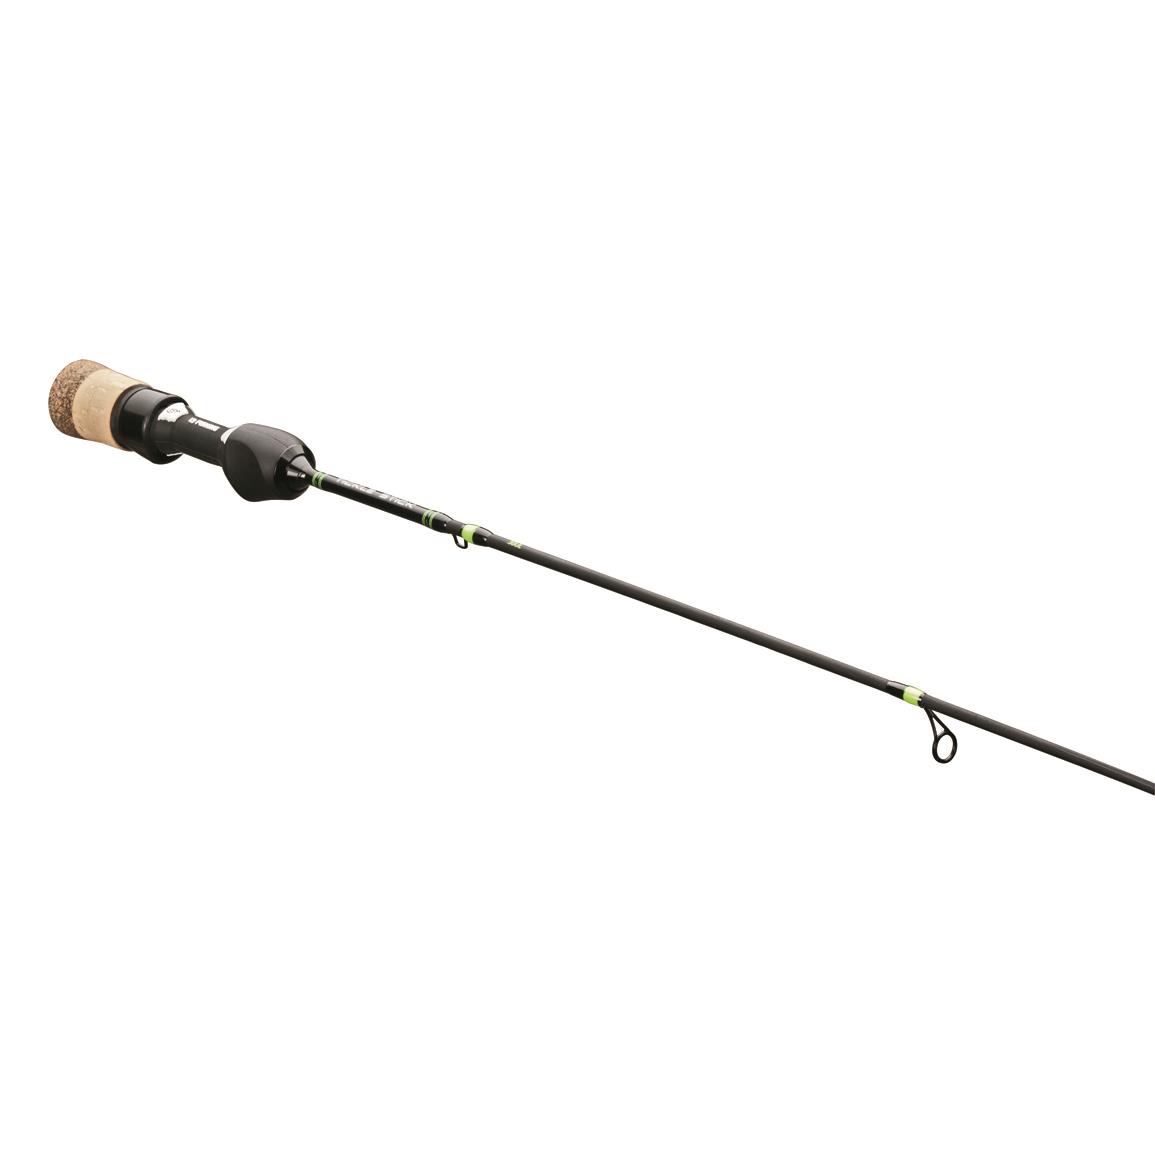 13 FISHING - Tickle Stick - Ice Fishing Rods